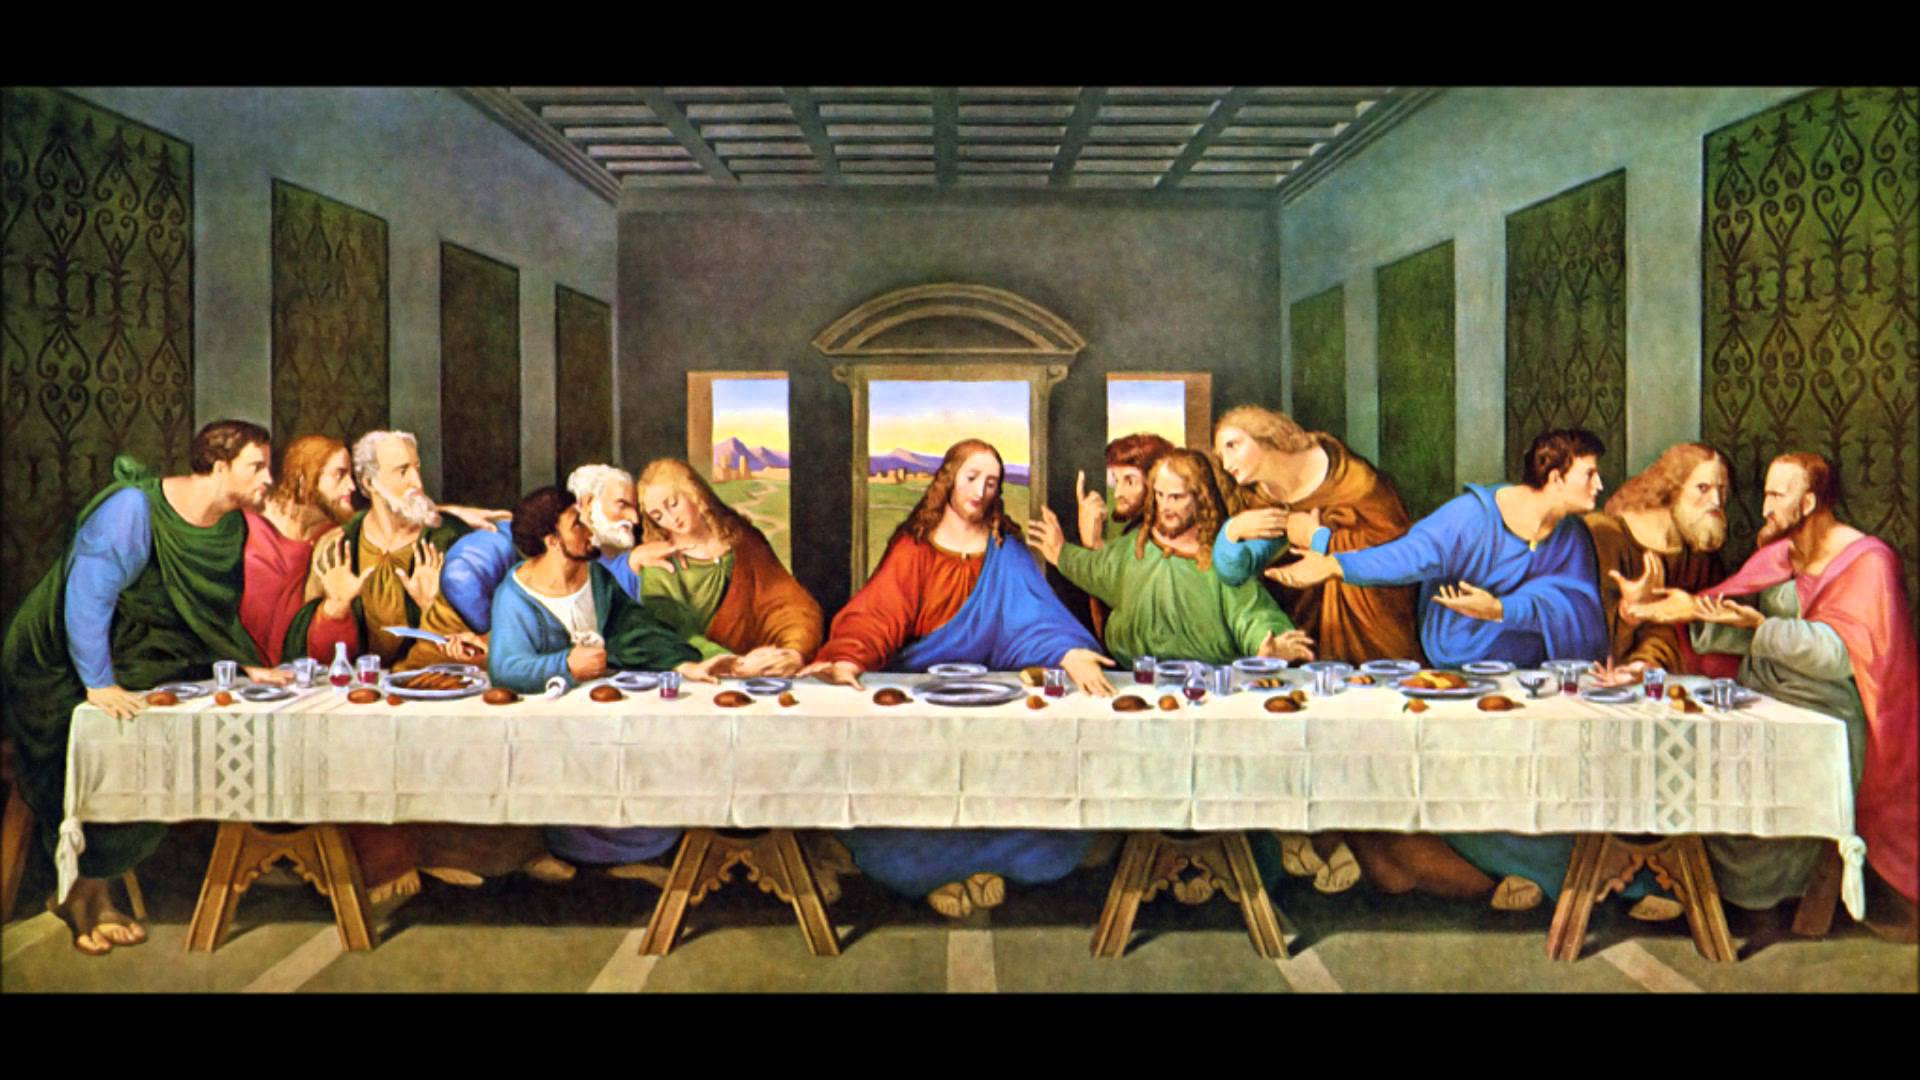 Image For > Last Supper Original Painting Hd